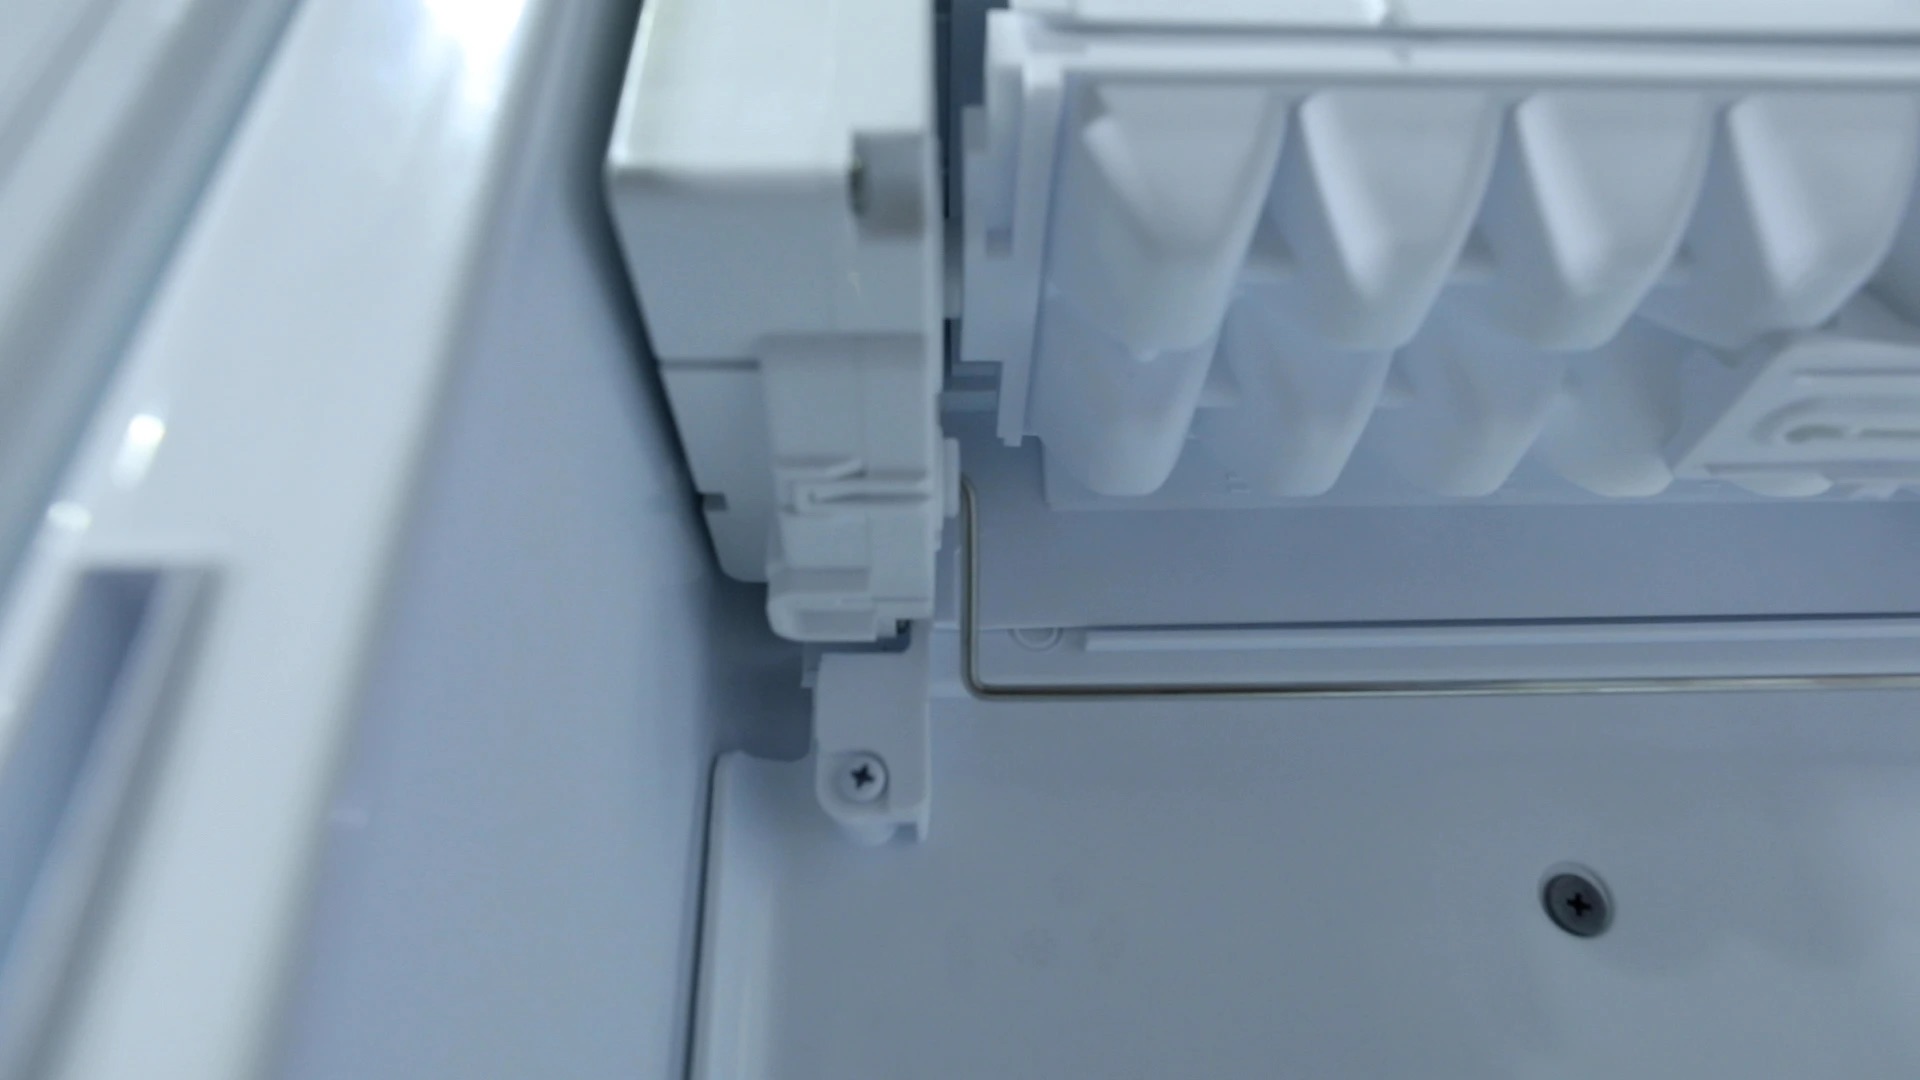 LG Craft Ice Not Working? Learn How To Replace Craft Ice Maker & Test 